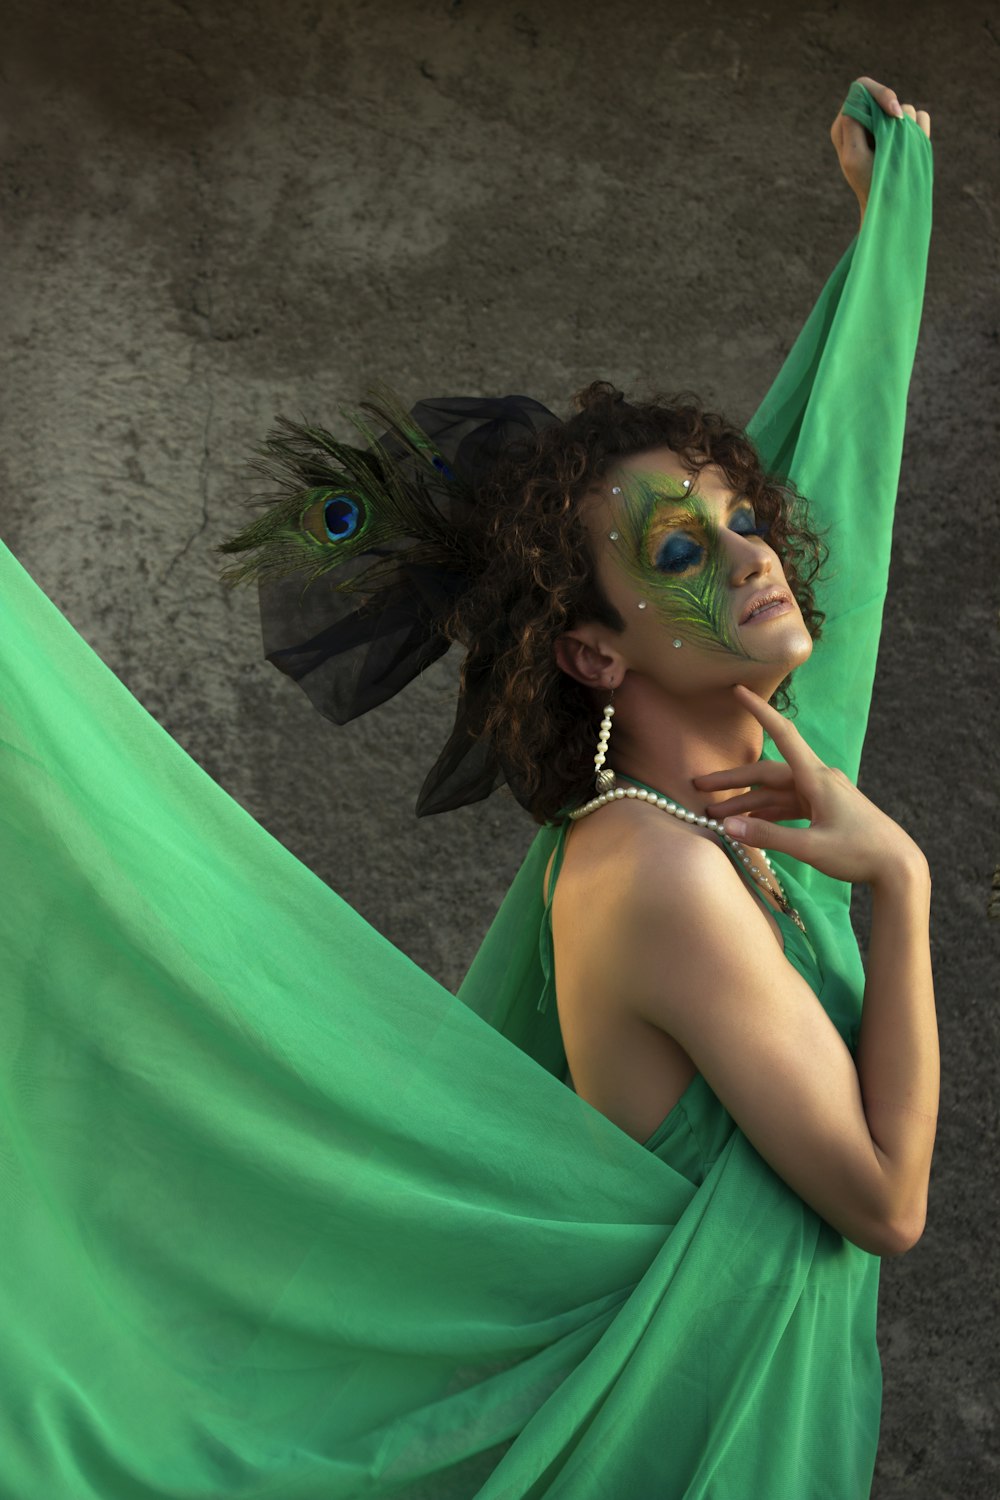 a woman in a green dress with a peacock painted on her face